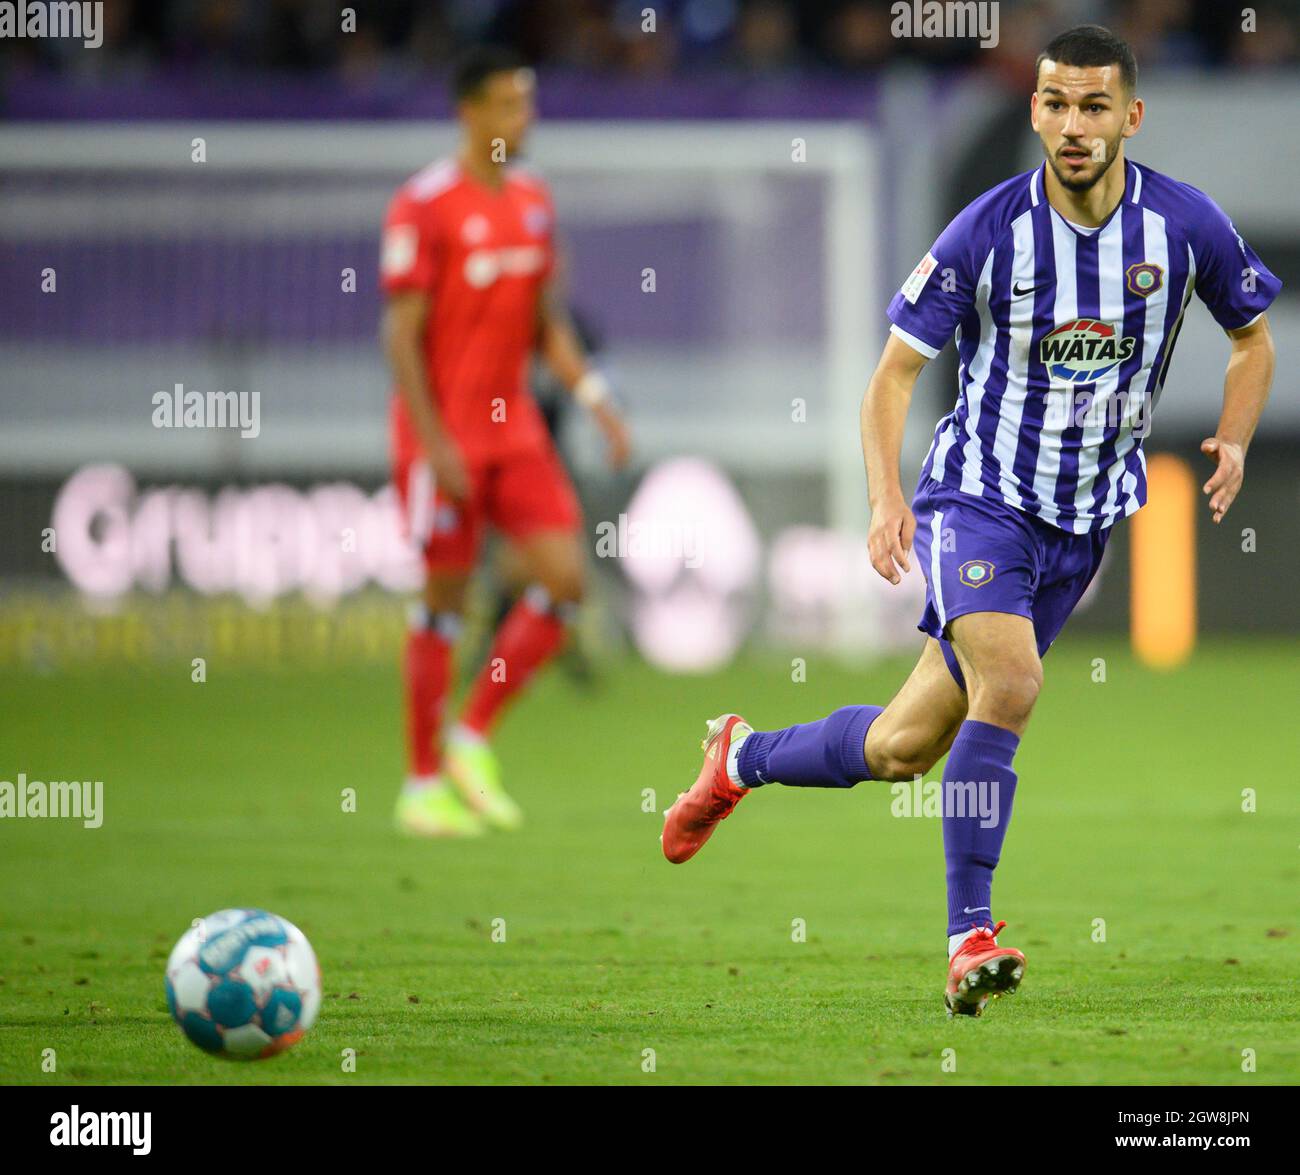 Aue, Germany. 01st Oct, 2021. Football: 2. Bundesliga, FC Erzgebirge Aue - Hamburger SV, Matchday 9, Erzgebirgsstadion. Aue's Soufiane Messeguem plays the ball. Credit: Robert Michael/dpa-Zentralbild/dpa - IMPORTANT NOTE: In accordance with the regulations of the DFL Deutsche Fußball Liga and/or the DFB Deutscher Fußball-Bund, it is prohibited to use or have used photographs taken in the stadium and/or of the match in the form of sequence pictures and/or video-like photo series./dpa/Alamy Live News Stock Photo